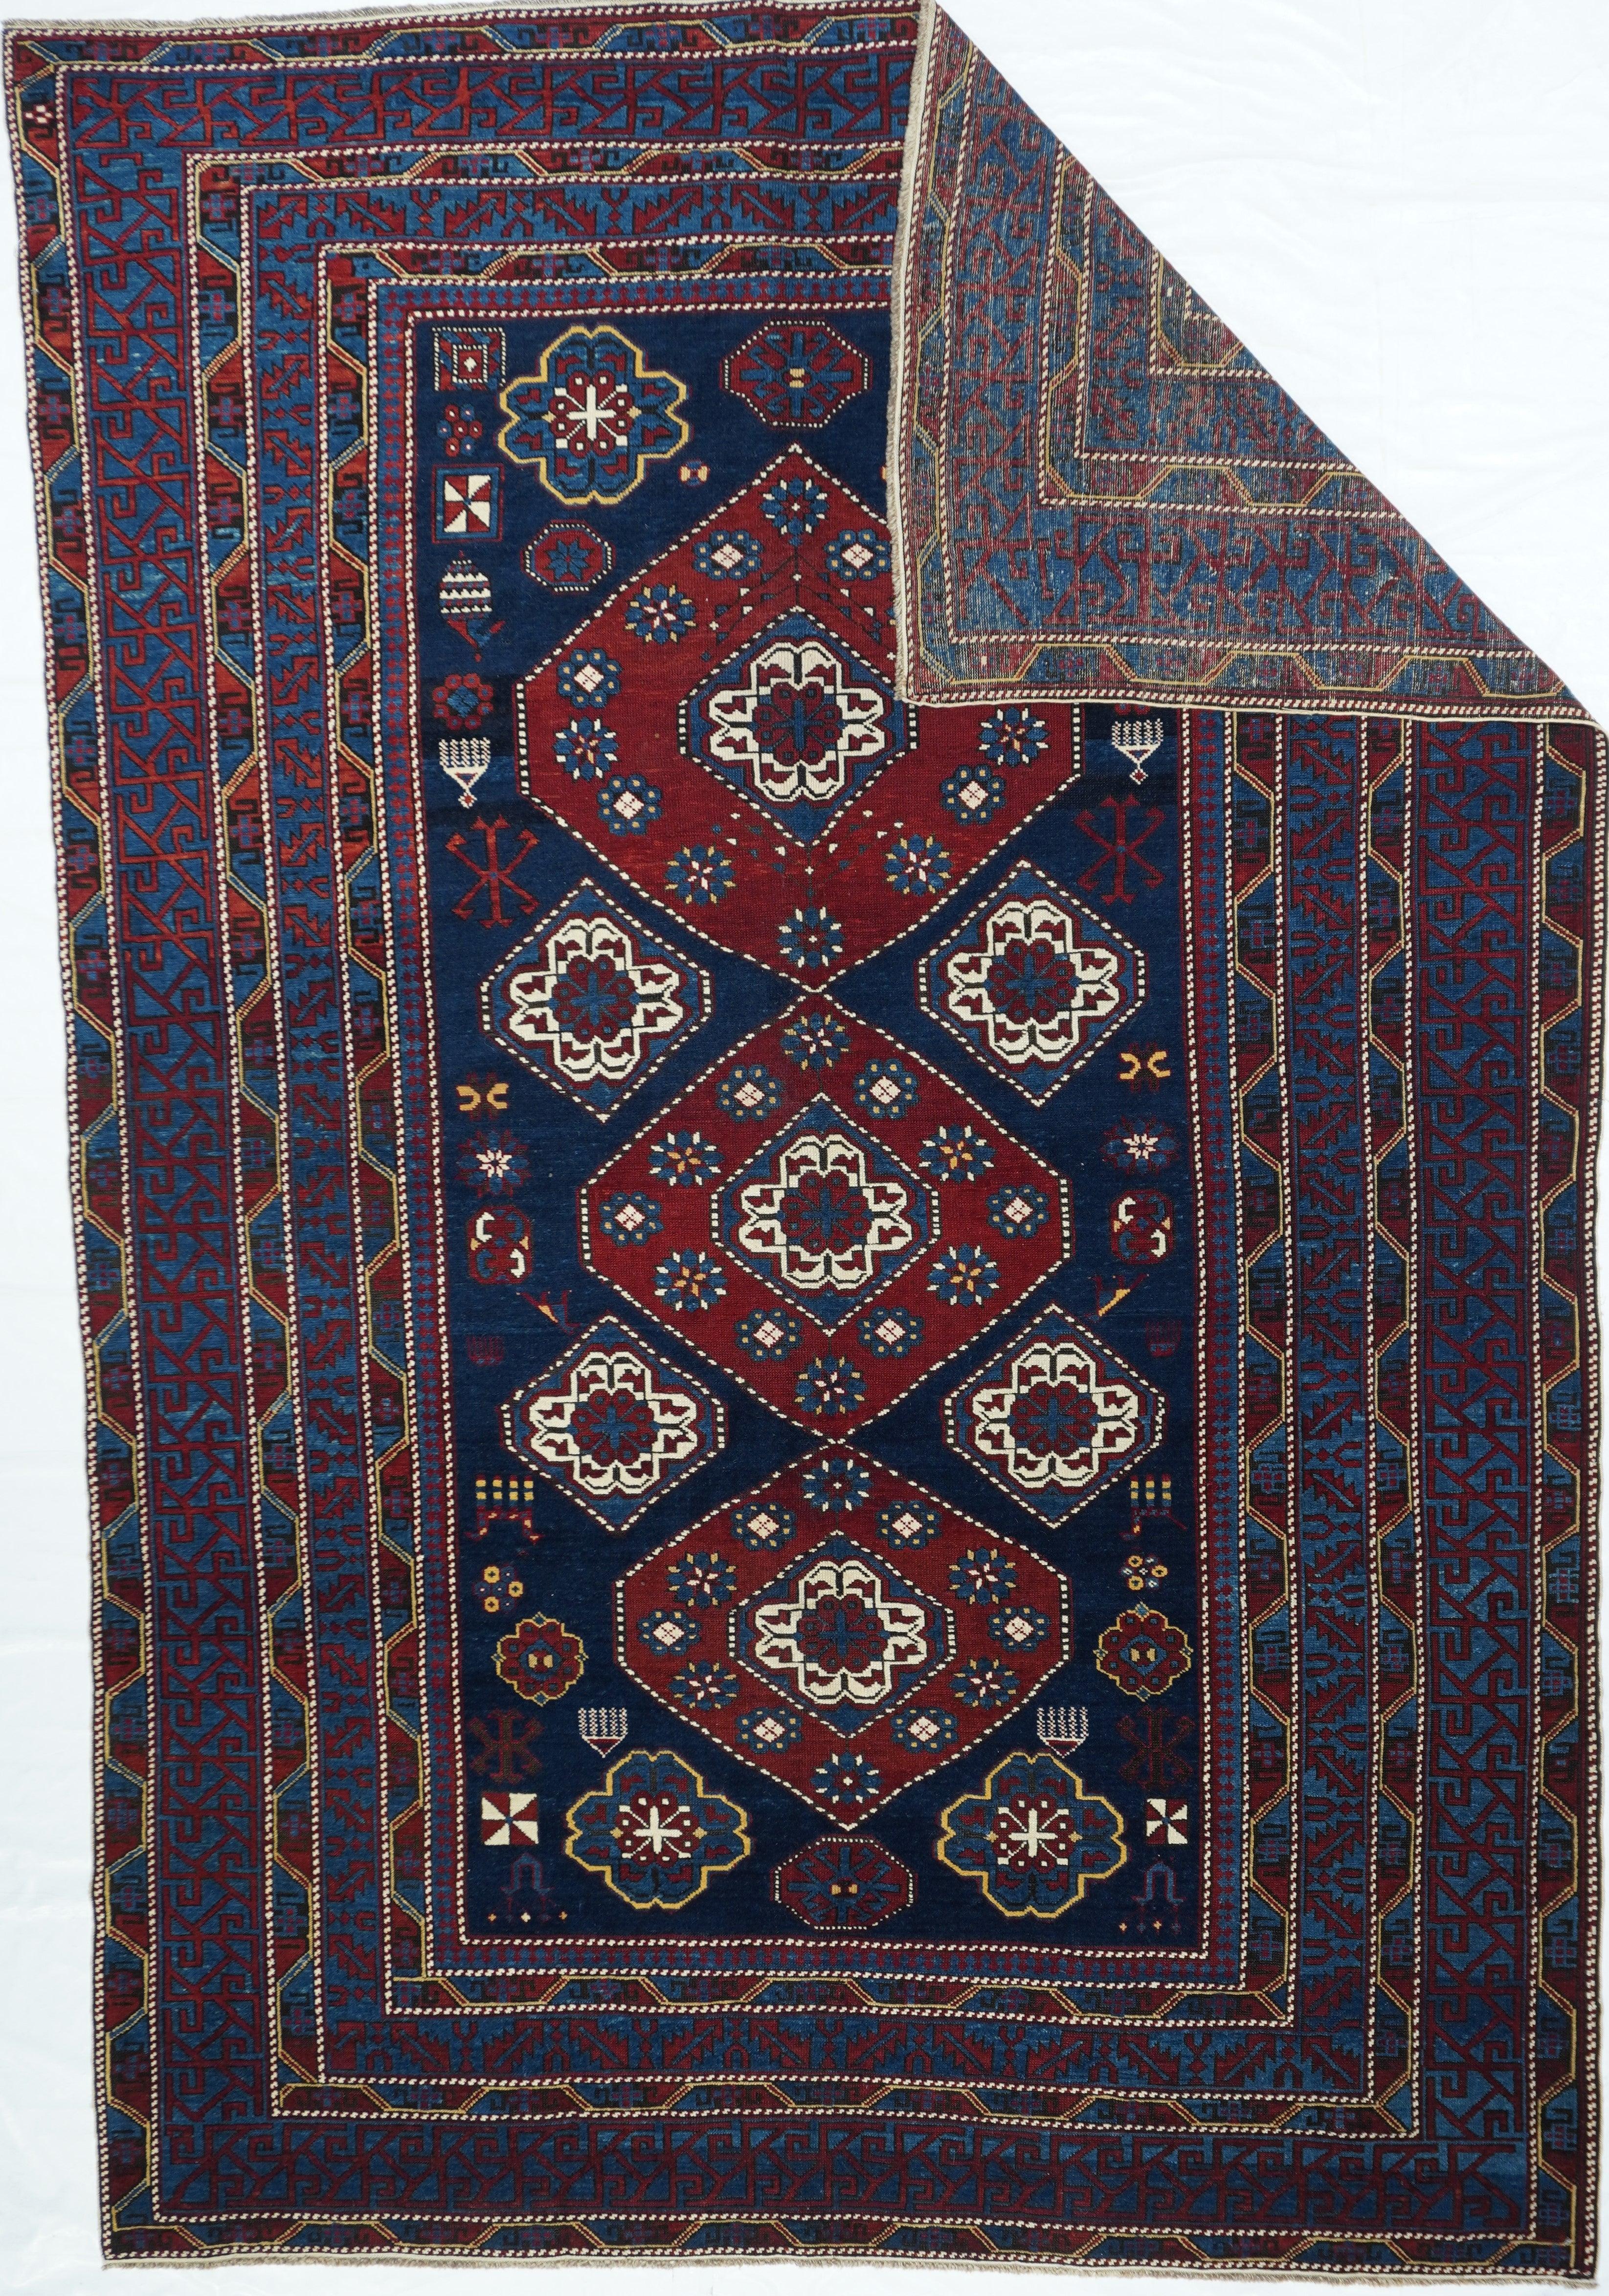 This east Caucasian well-woven scatter is basically a study in blue tones: royal blue for the field and abrashed medium-dark blue in the border system. Three hexagonal red panels enclose each an eight petal ivory rosette, and this motif reappears